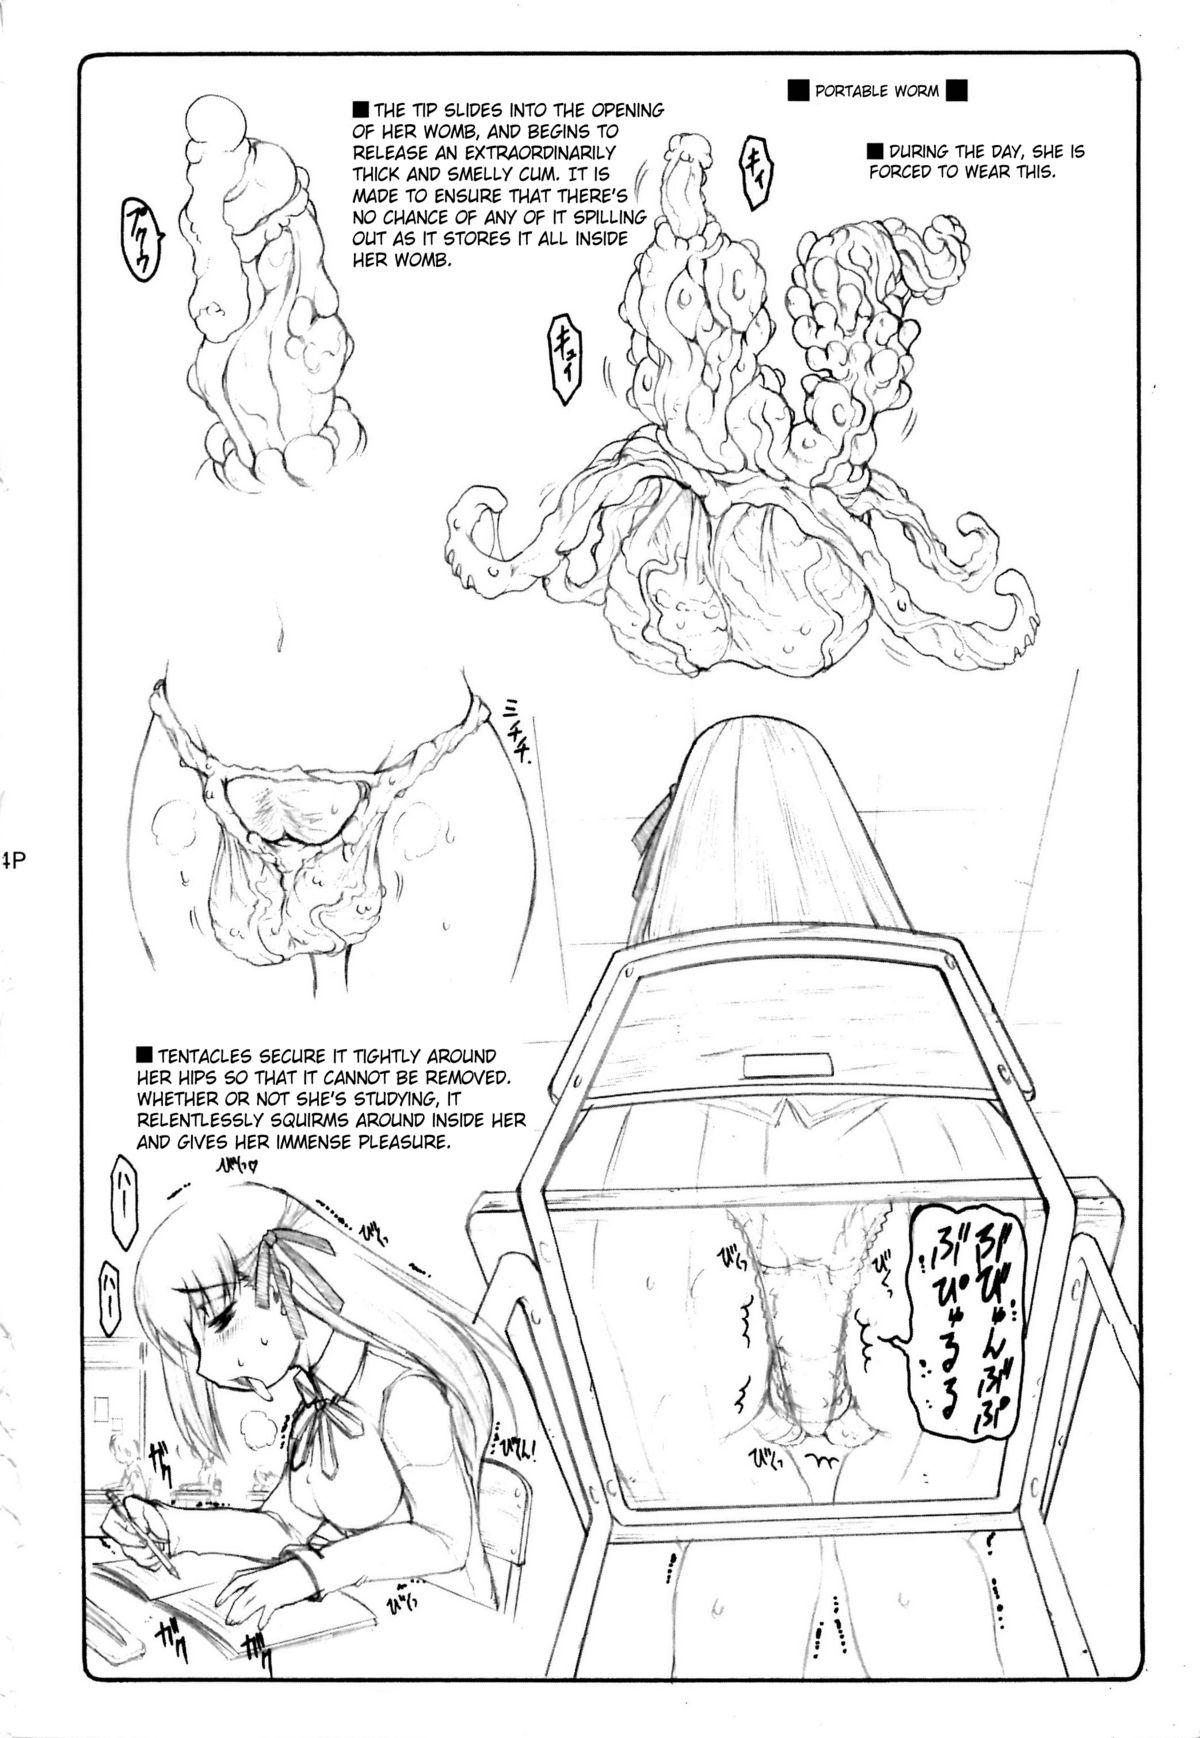 Ikillitts Kotori 4 & 6 Extra Pages - Fate stay night Private - Page 6